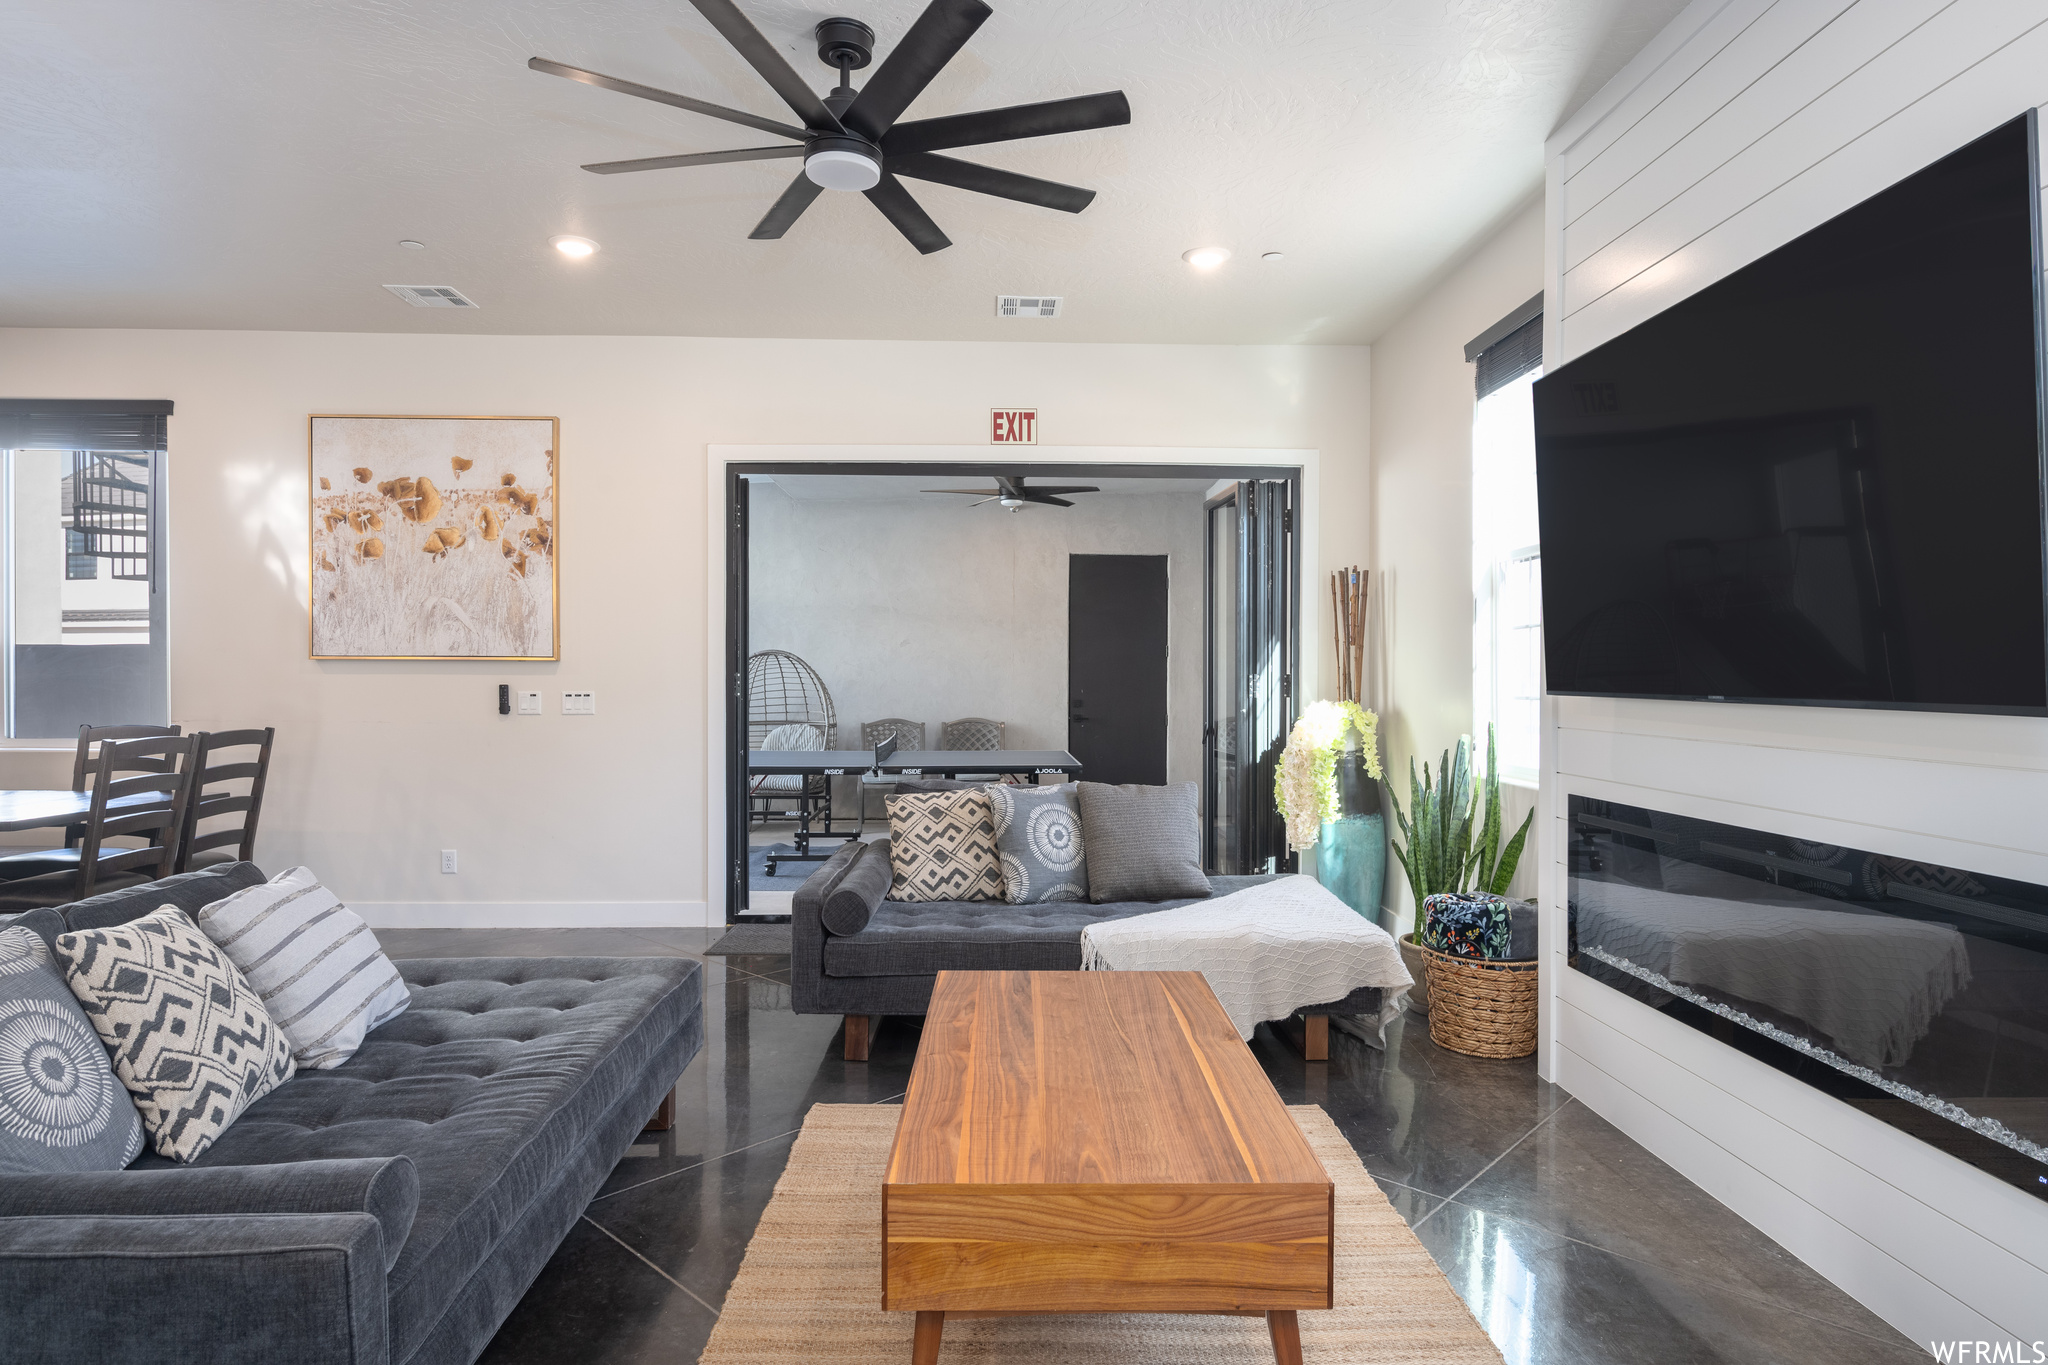 Living room with dark tile flooring and ceiling fan